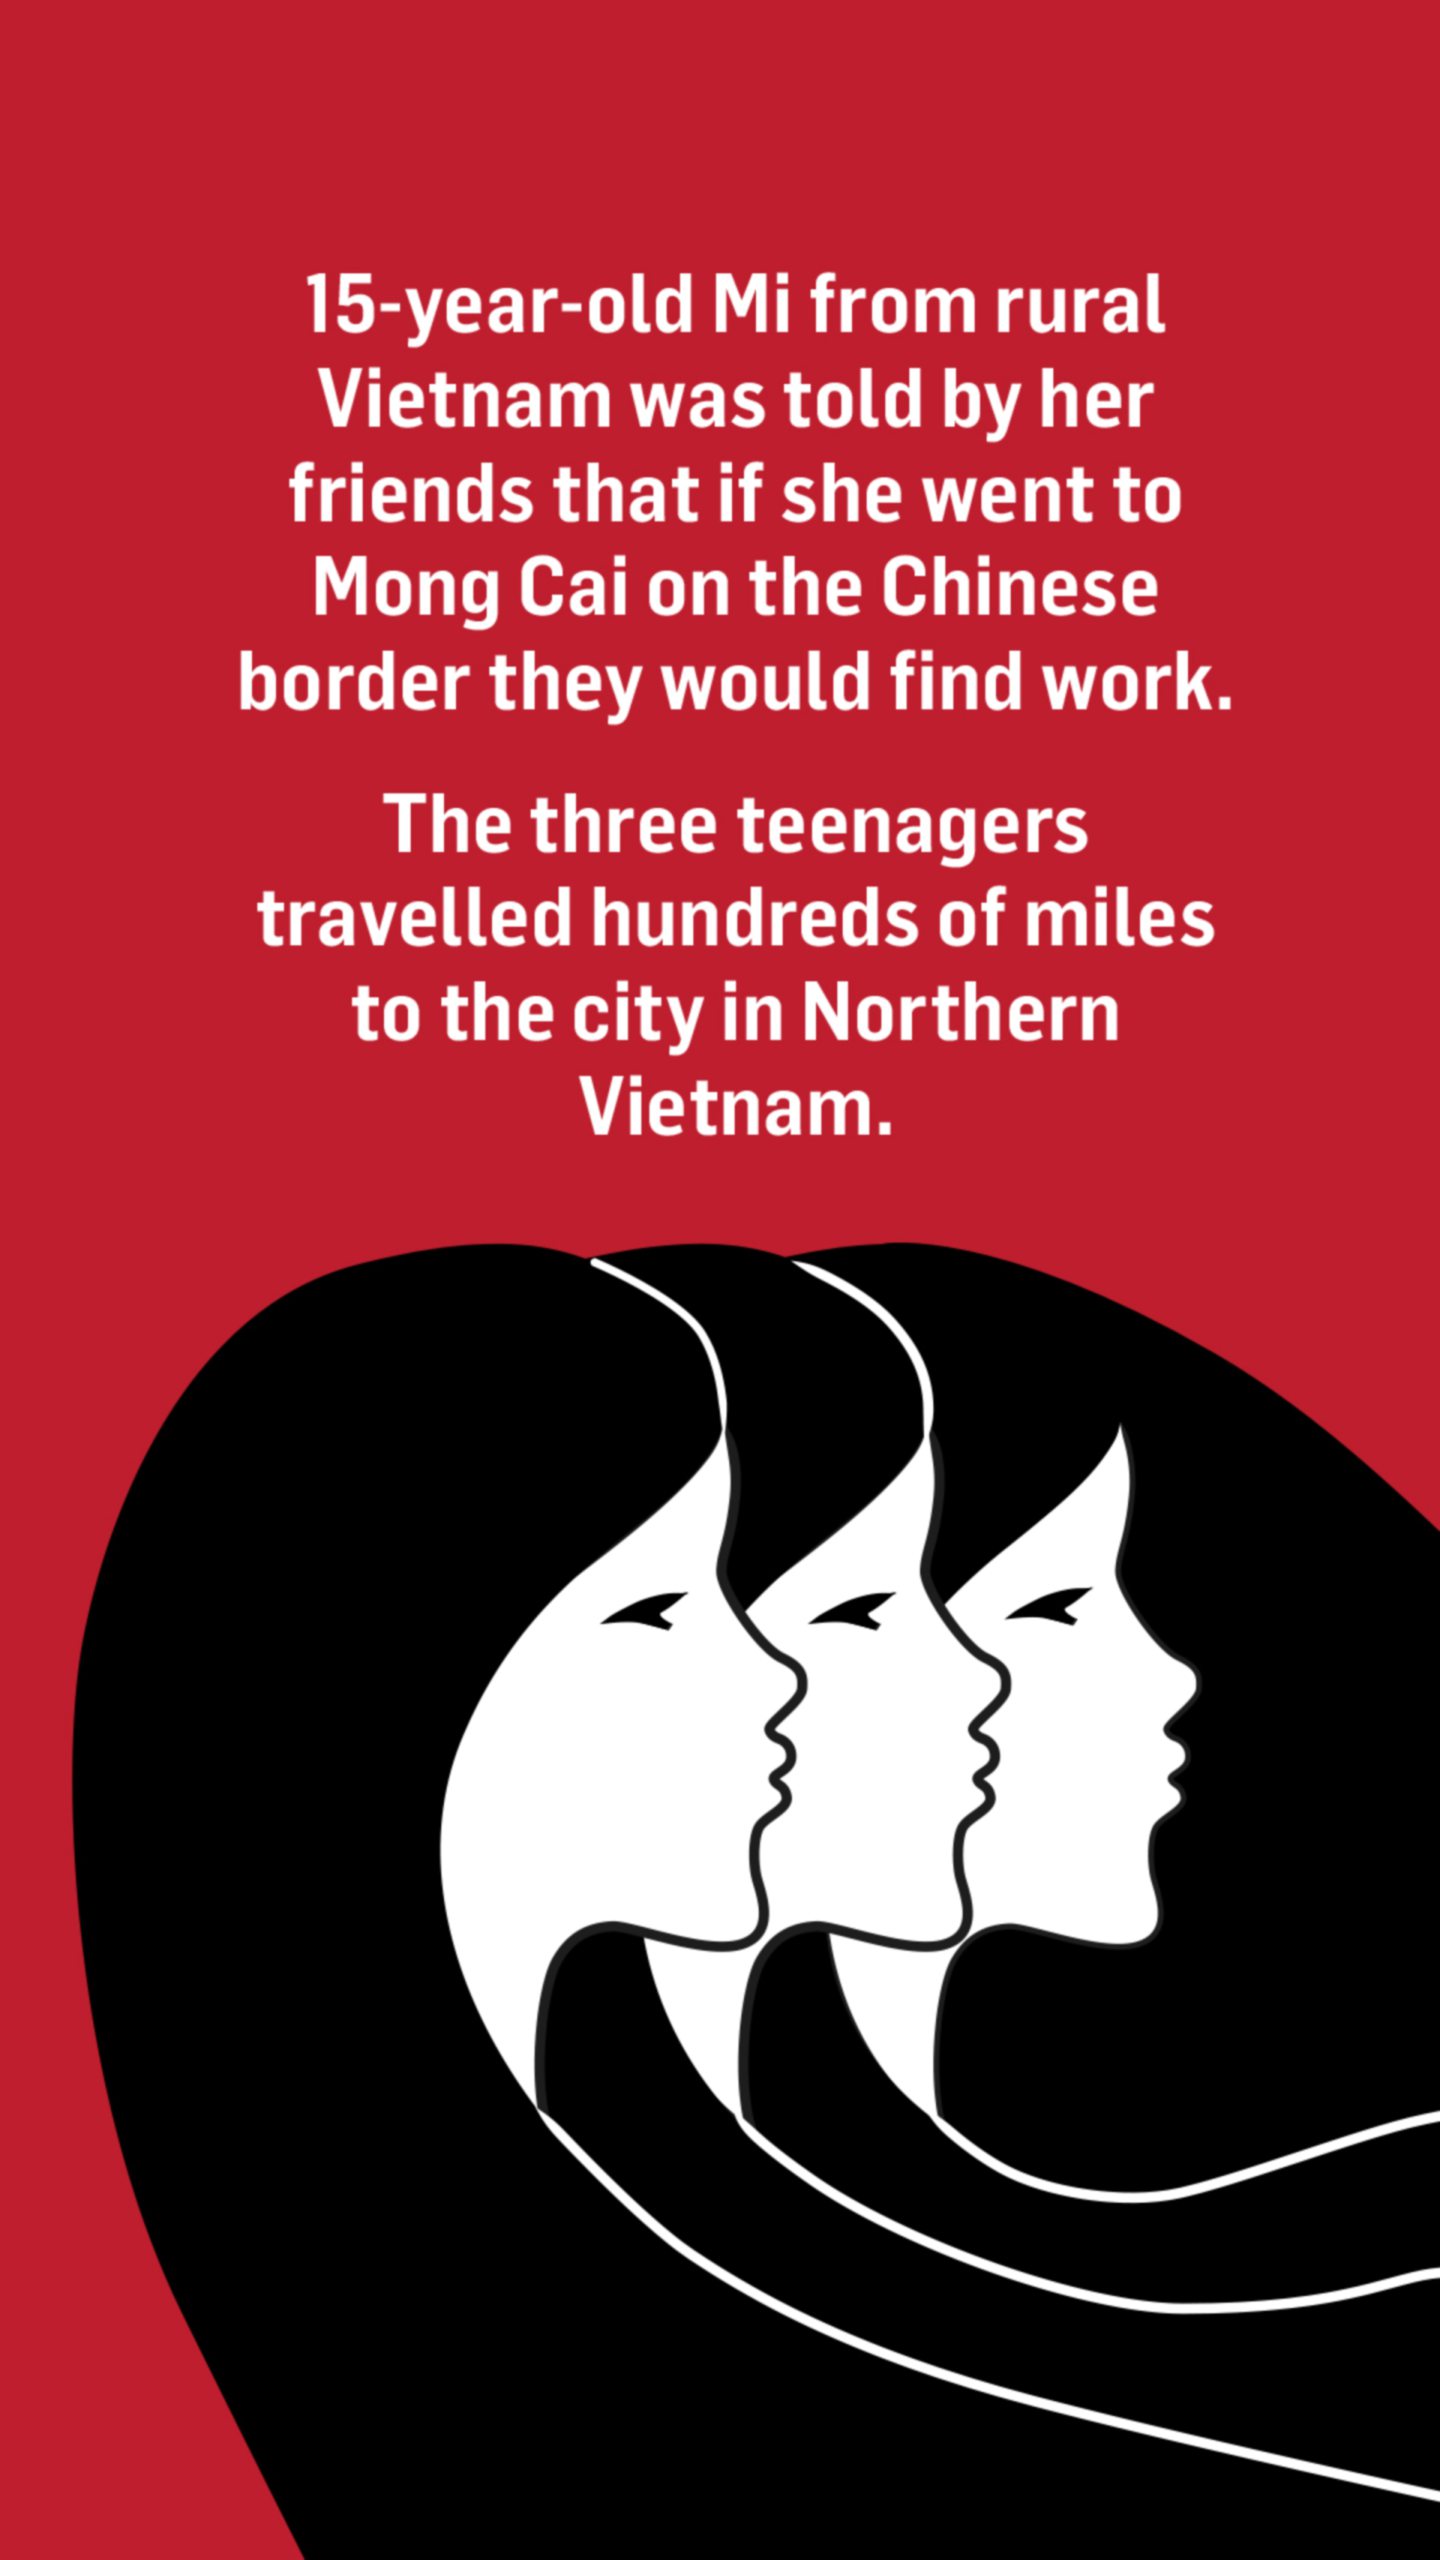 An illustration of three girls' heads with the words: Fifteen-year-old Mi from rural Vietnam was told by her friends that if she went to Mong Cai on the Chinese border they would find work.

The three teenagers travelled hundreds of miles to the city in Northern Vietnam.